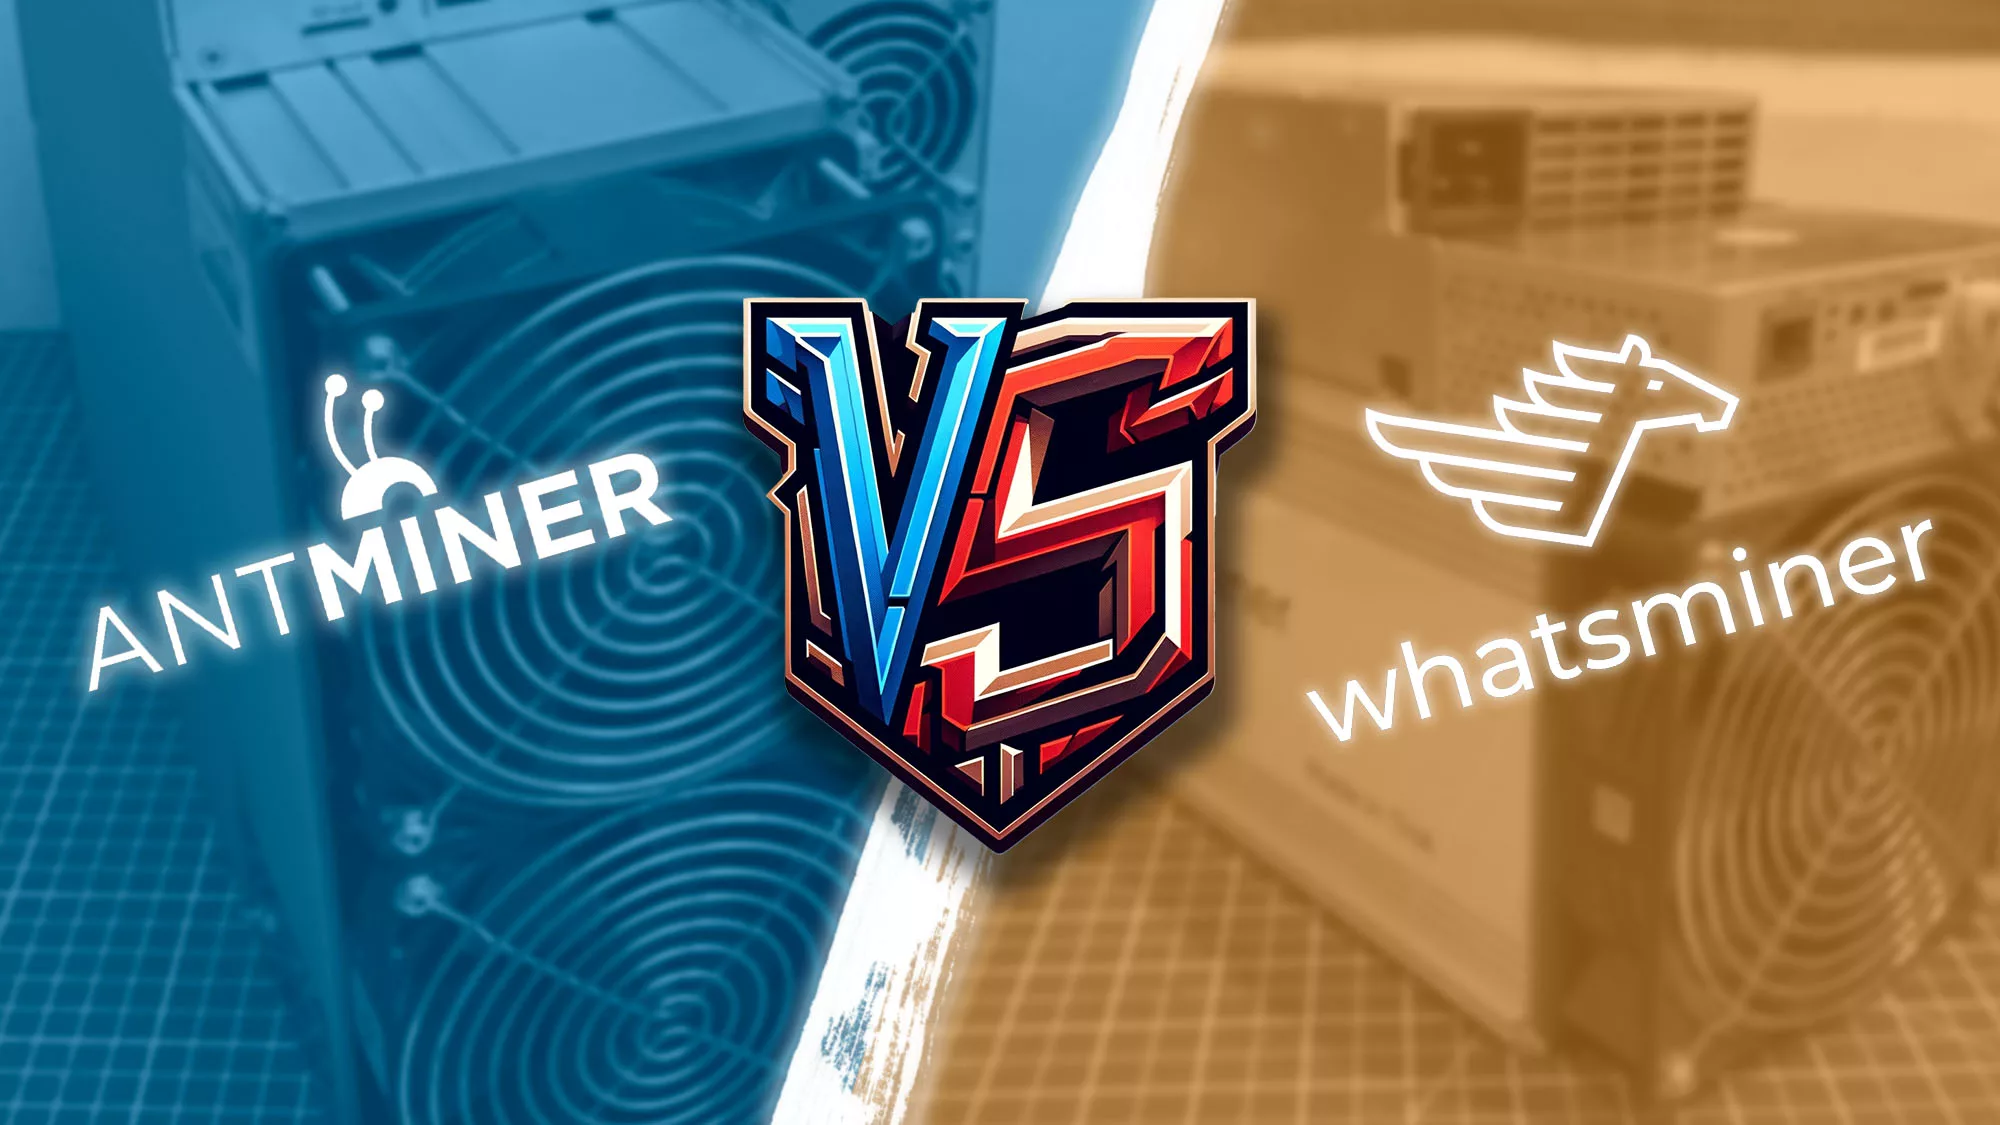 Antminer vs Whatsminer: Which is Better in General?